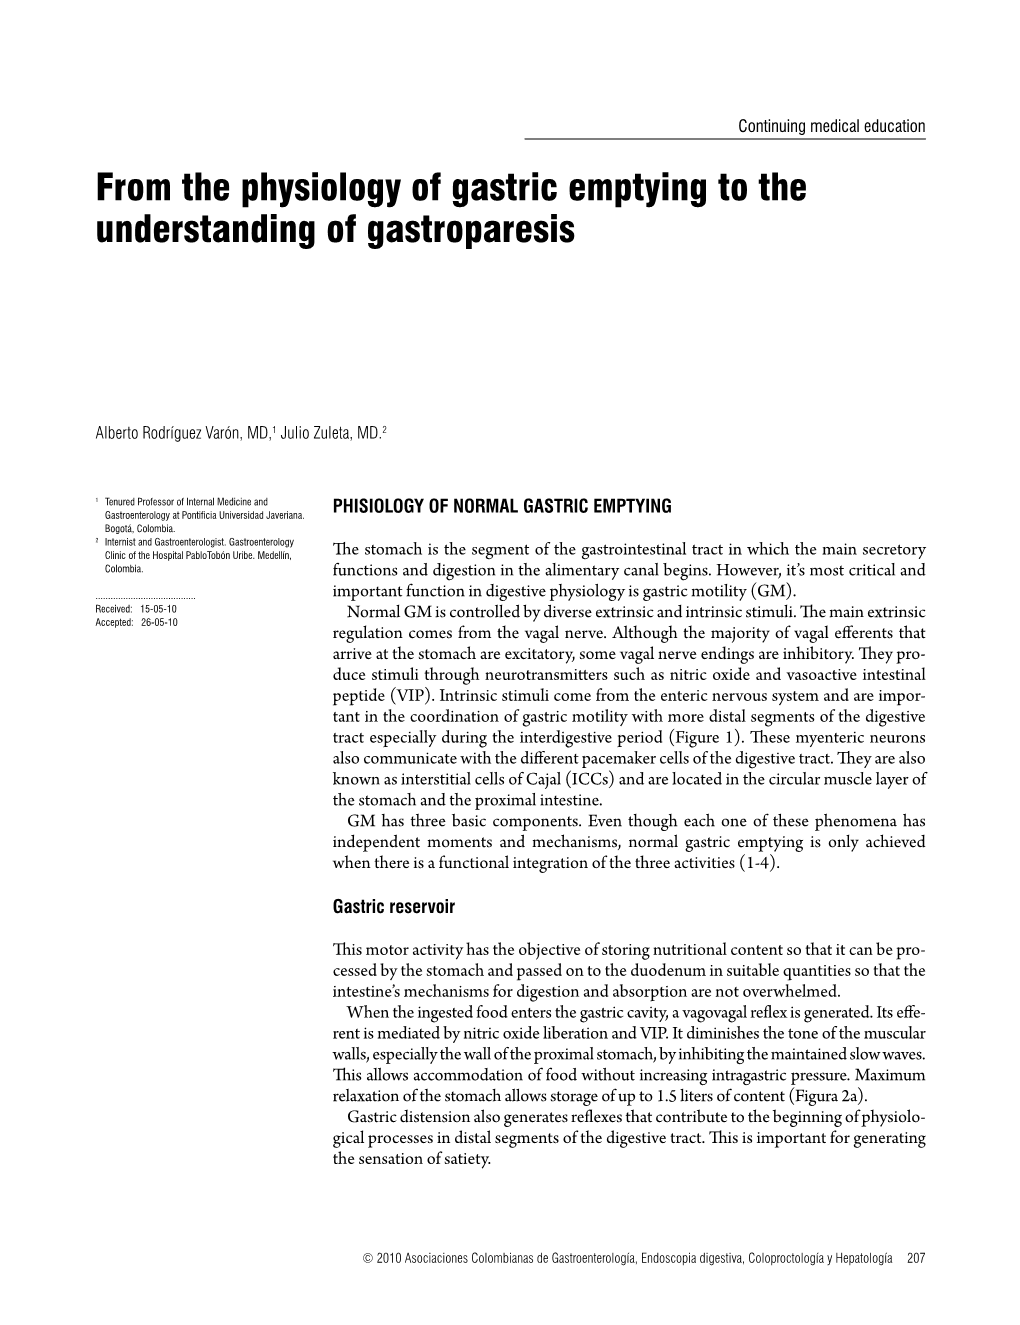 From the Physiology of Gastric Emptying to the Understanding of Gastroparesis